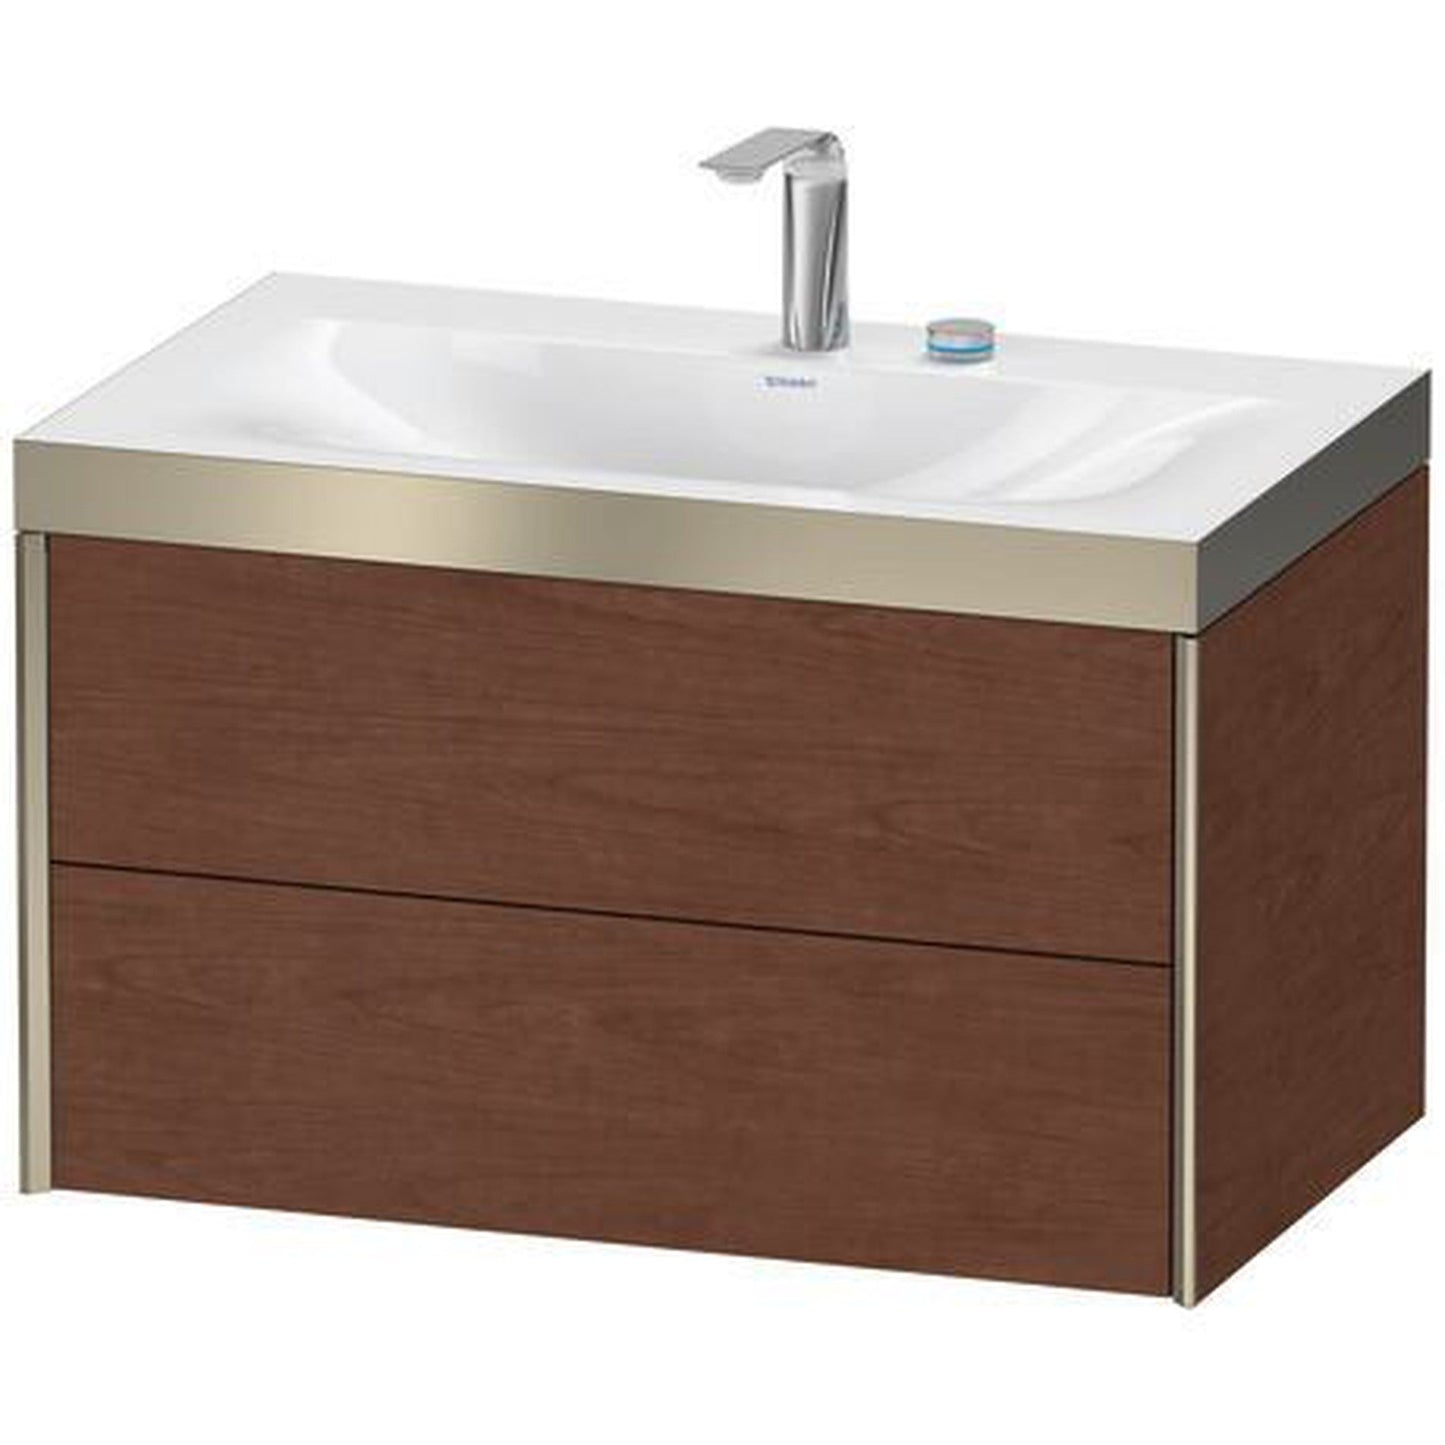 Duravit Xviu 31" x 20" x 19" Two Drawer C-Bonded Wall-Mount Vanity Kit With Two Tap Holes, American Walnut (XV4615EB113P)